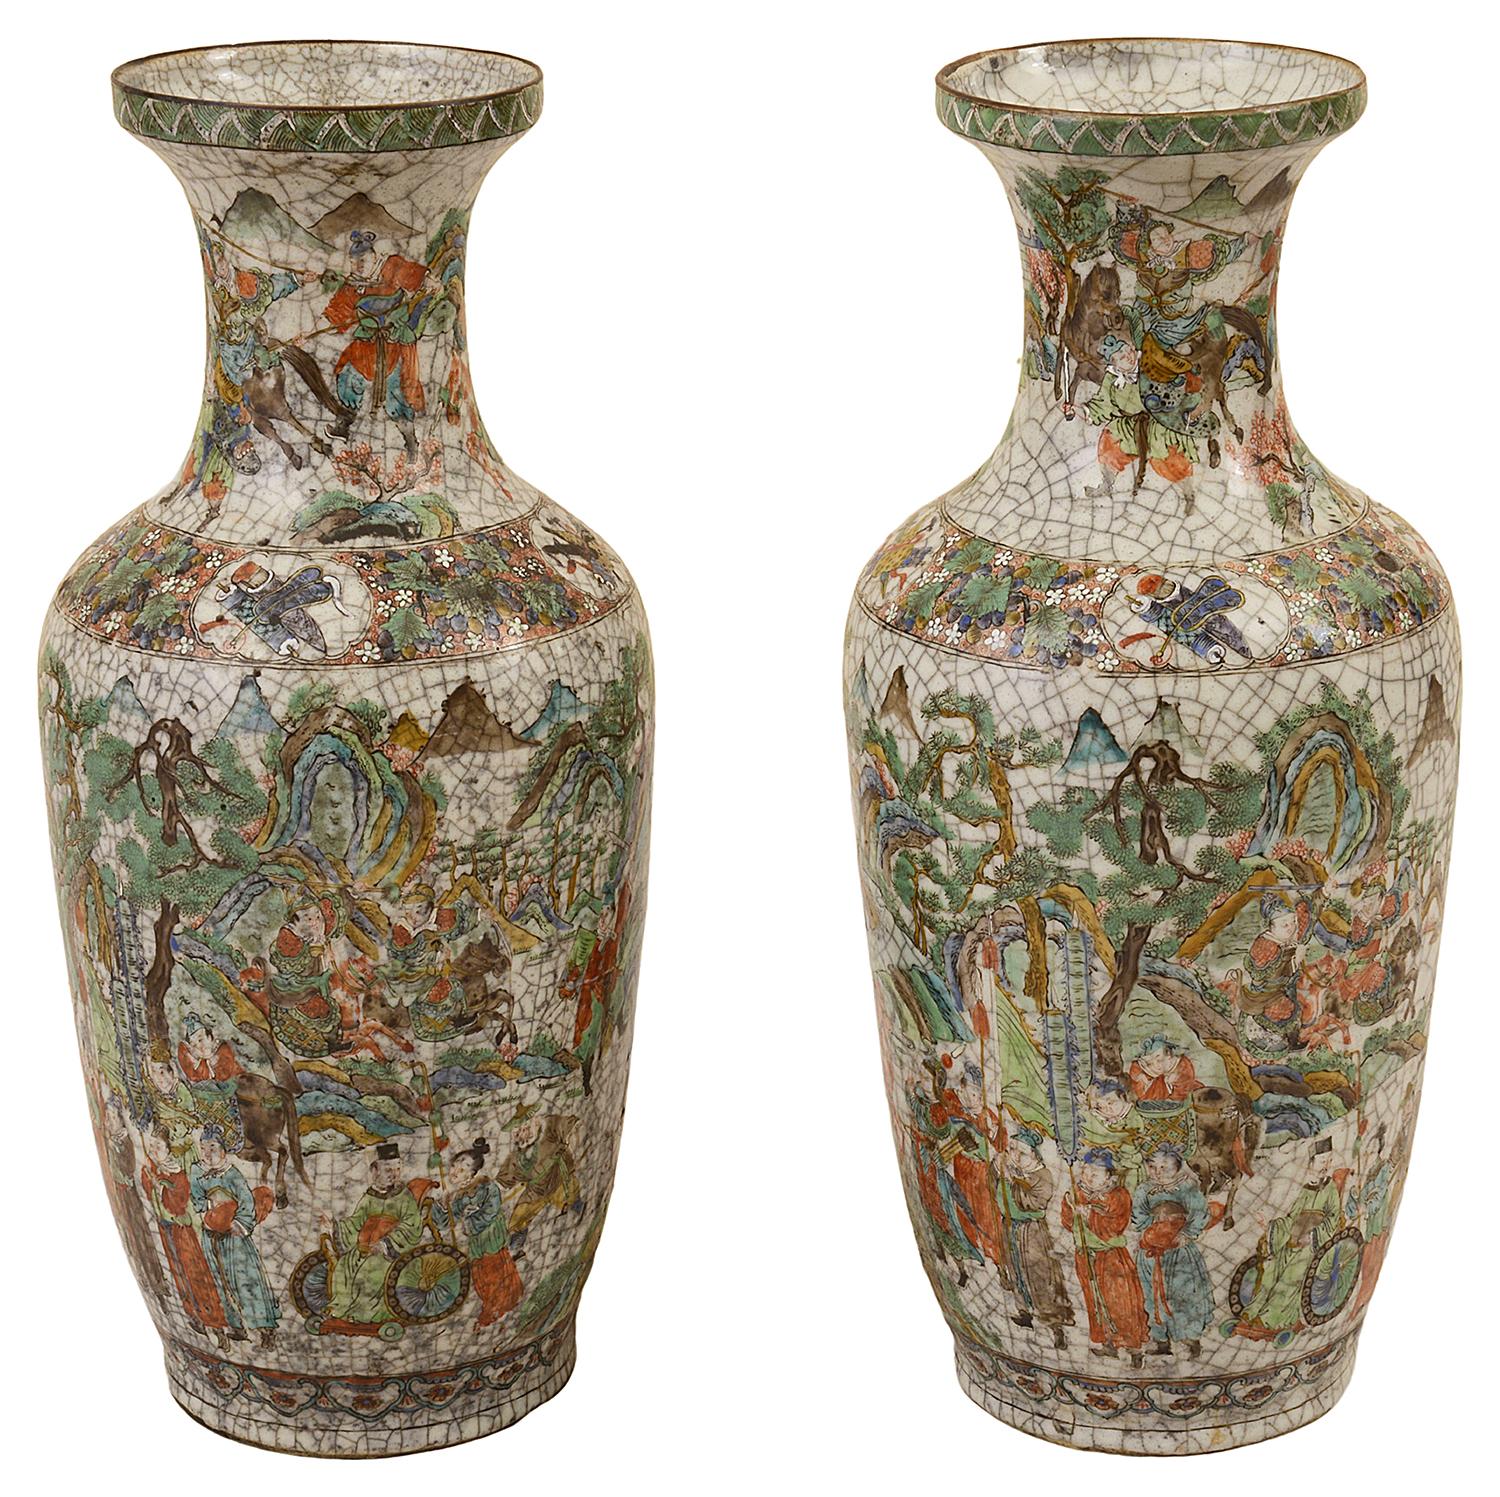 A good quality pair of late 19th century Chinese crackleware vases/lamps, each with hand painted scenes depicting warriors, courtiers and scholars.
The vases can be wired as lamps if required.
     